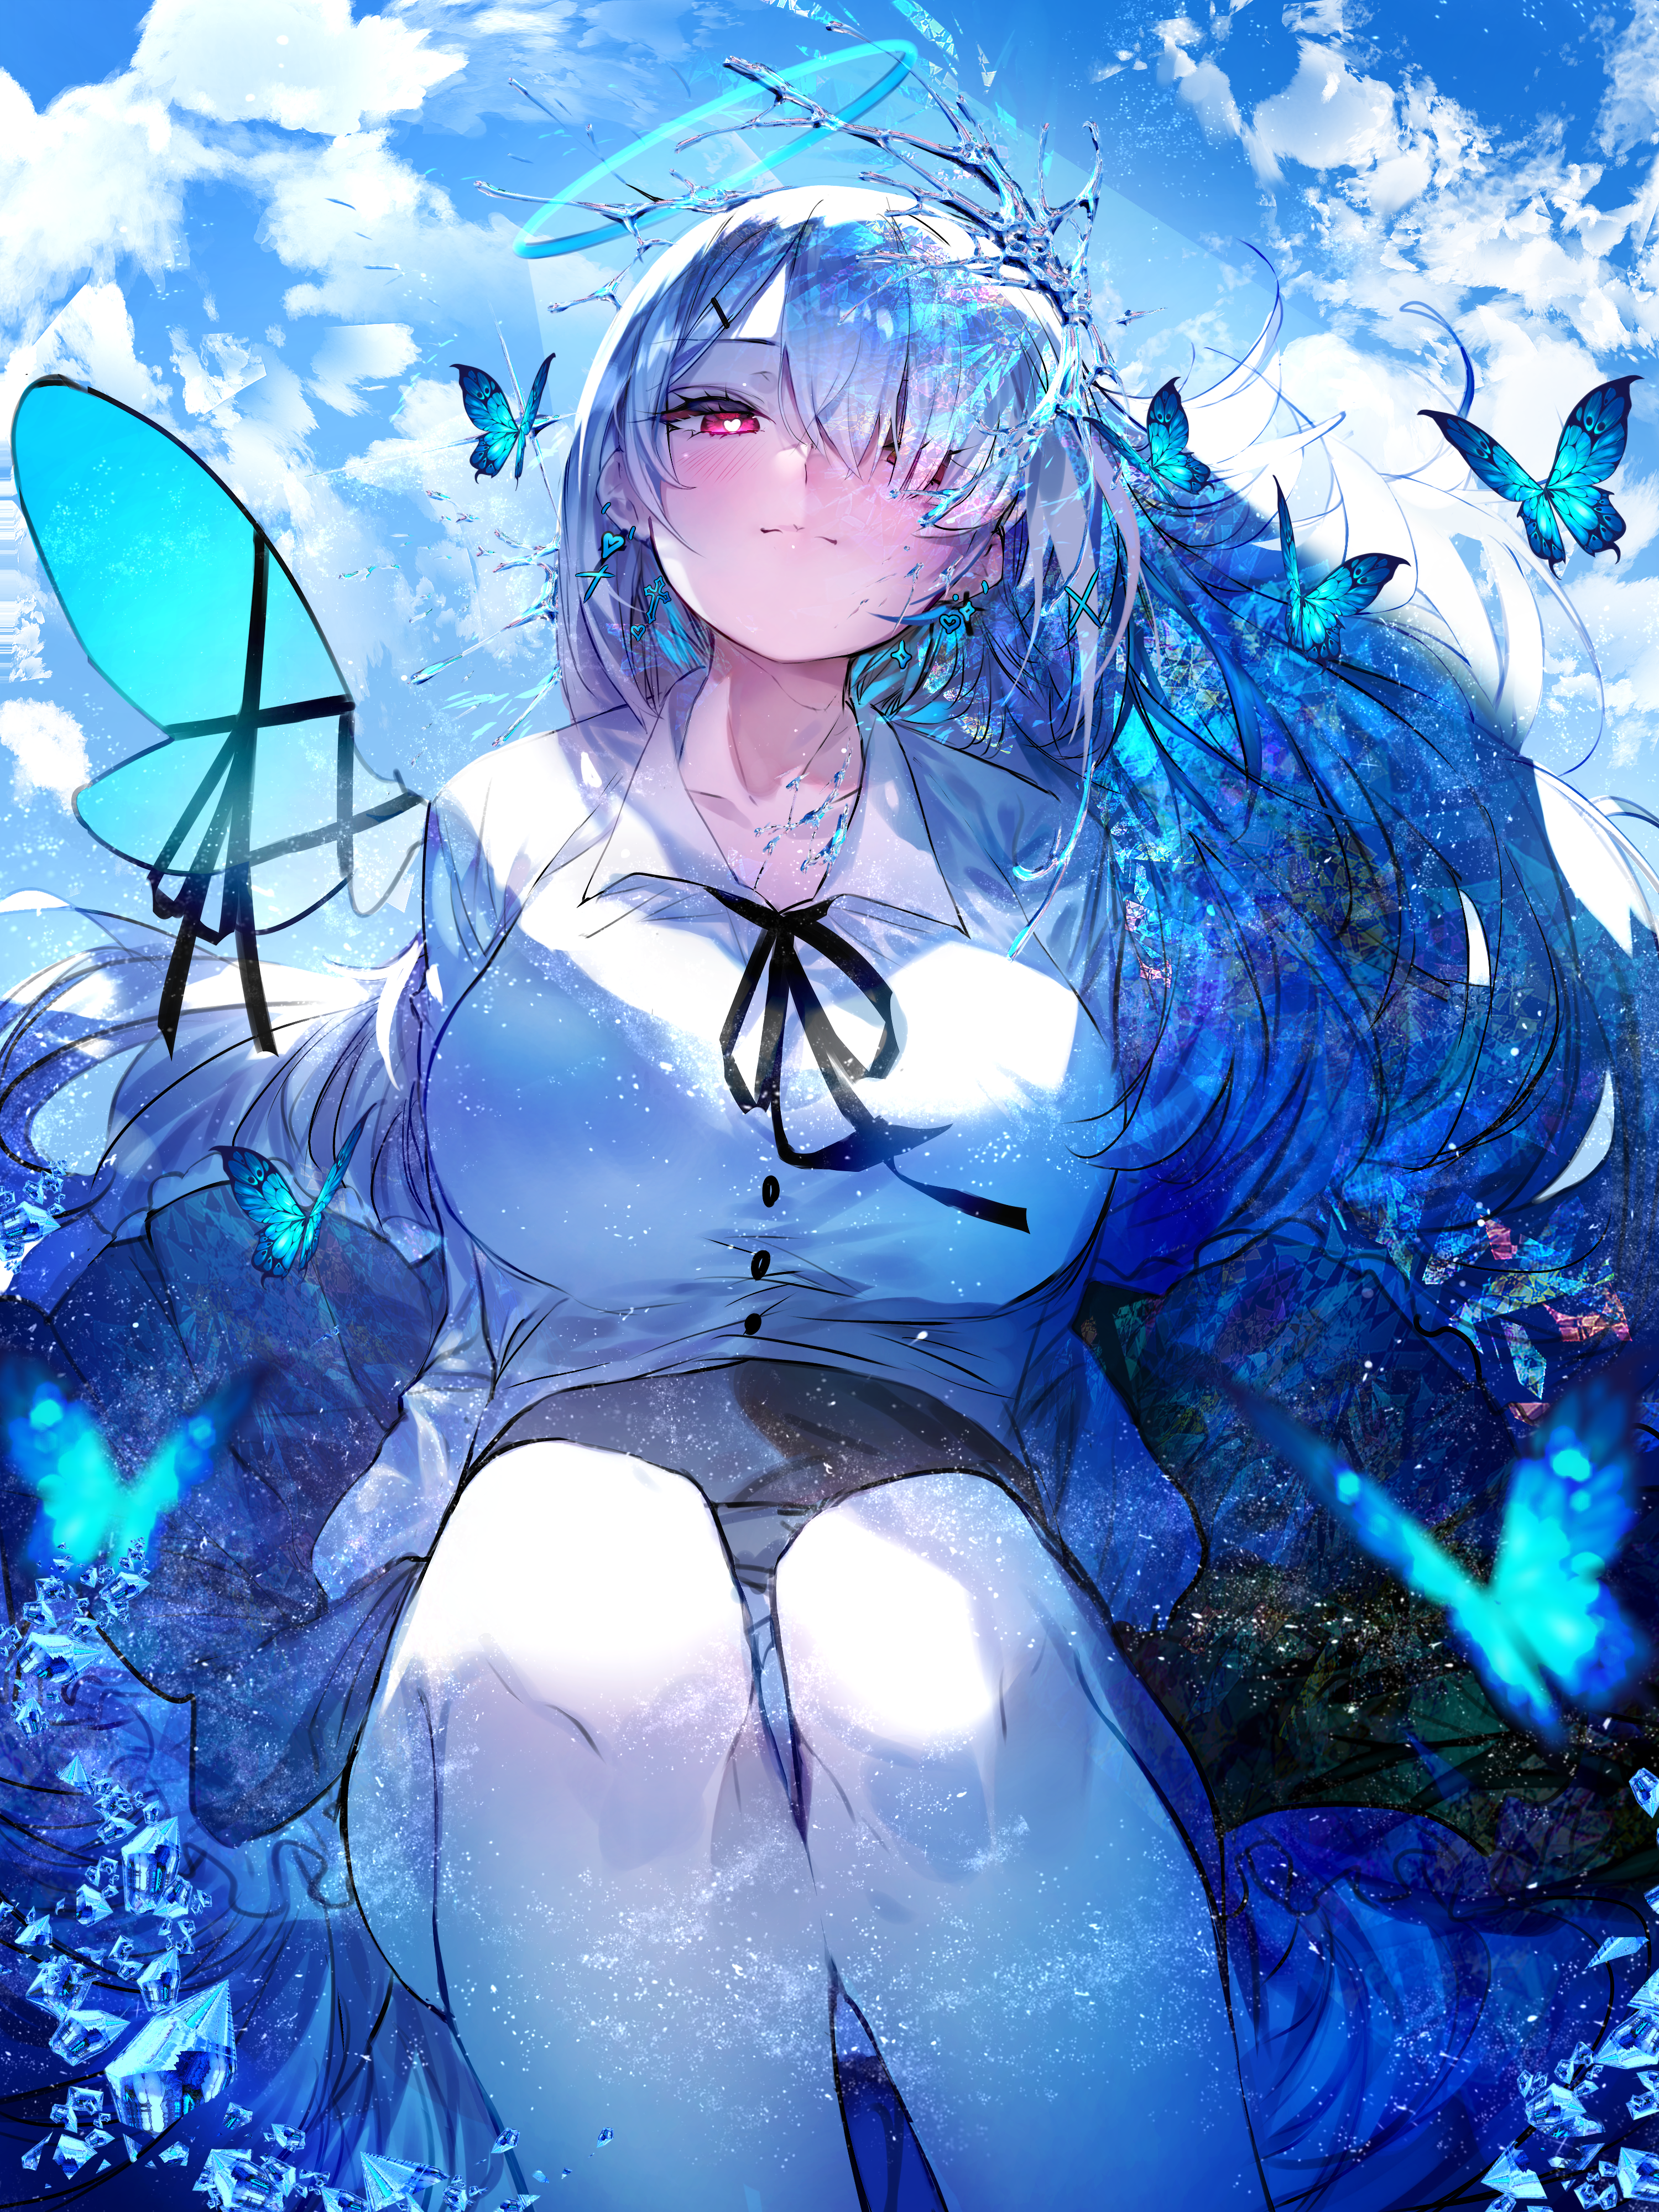 W Artist Pixiv Anime Anime Girls Portrait Display Butterfly Hair Over One Eye Heart Eyes Clouds Sky  3000x4000